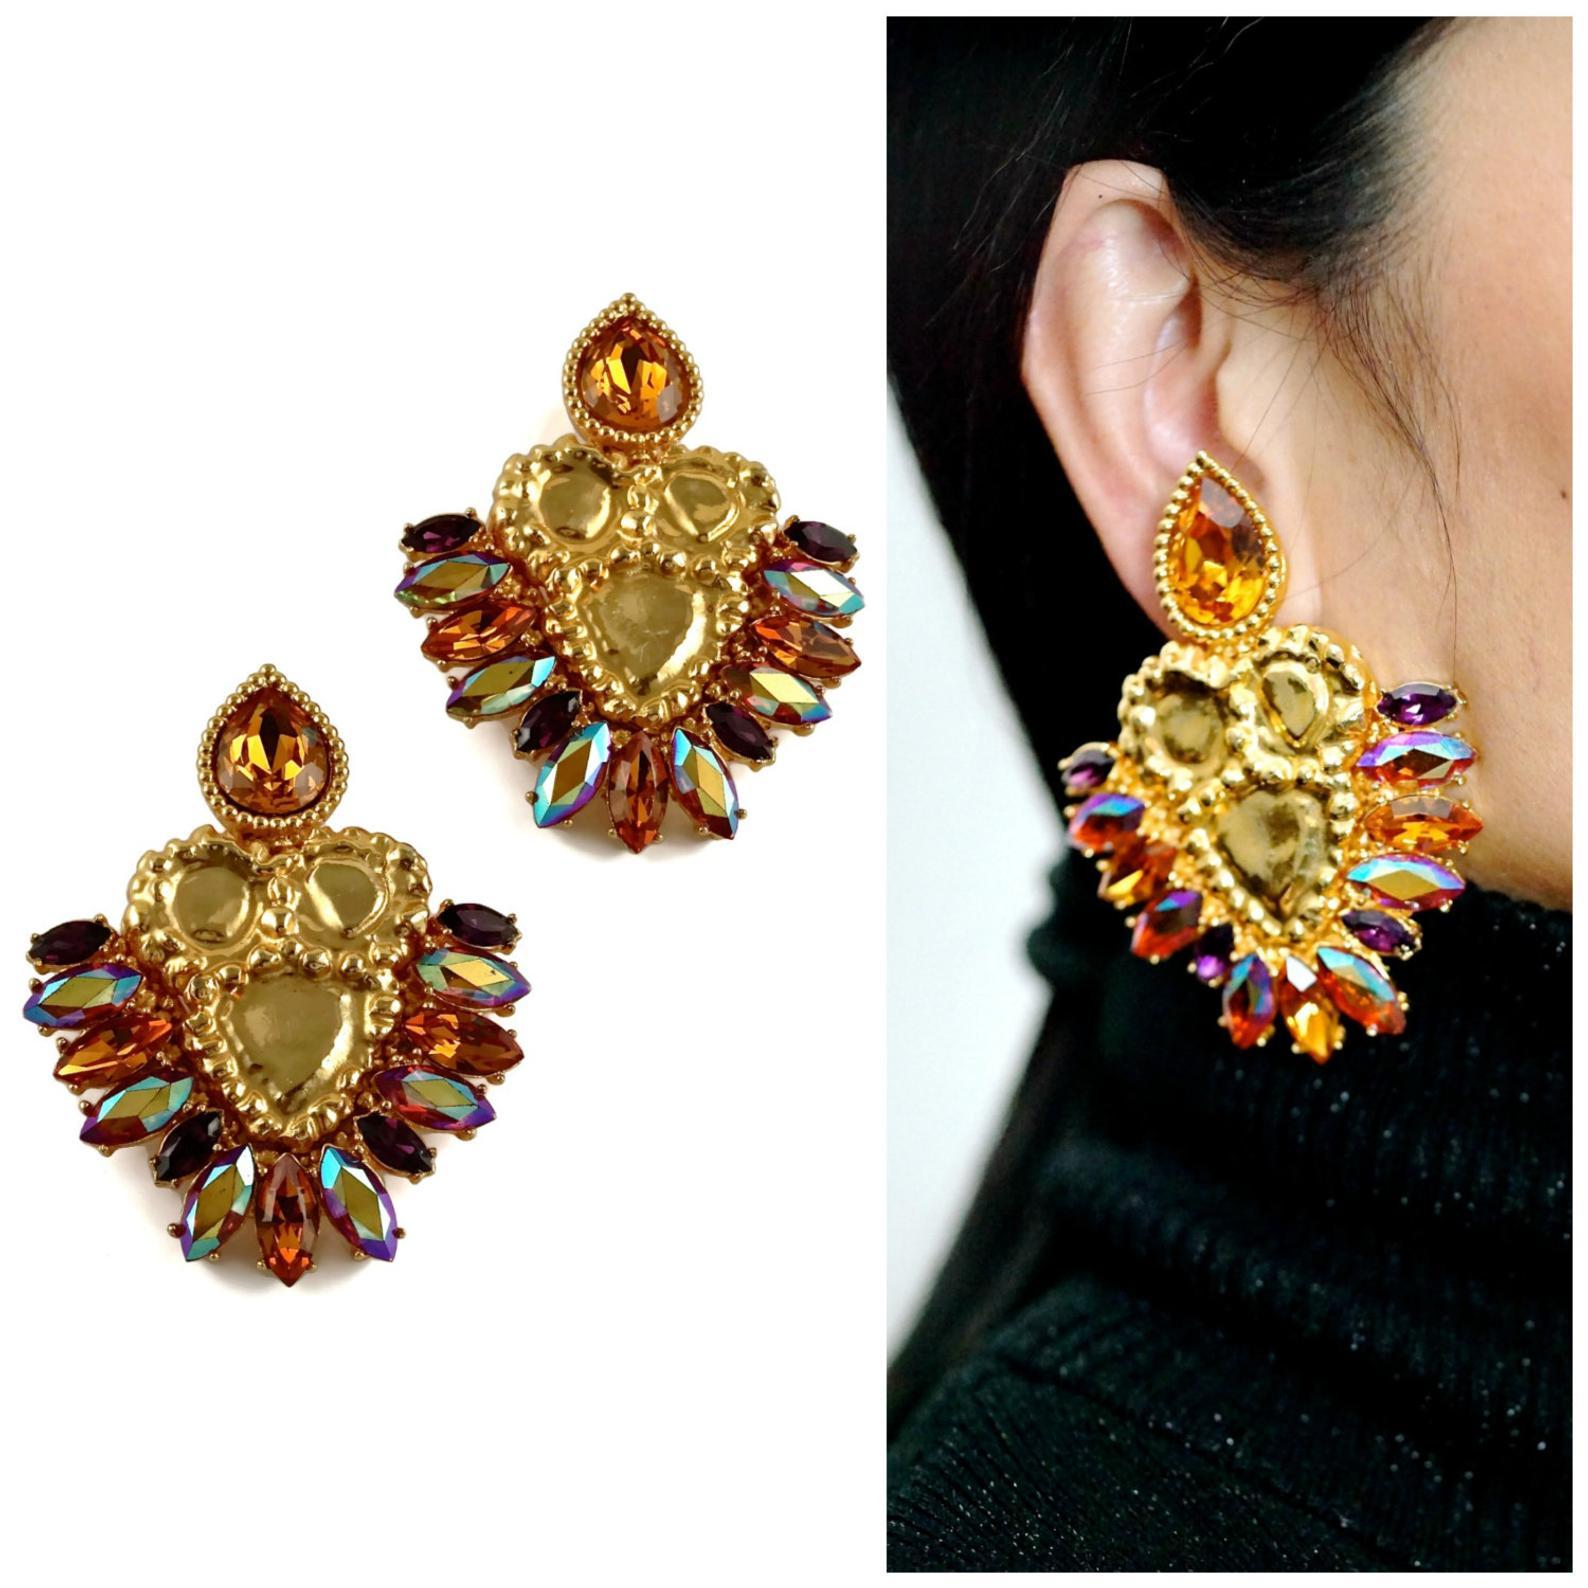 Vintage Massive YVES SAINT LAURENT Iridescent Topaz Rhinestone Jewelled Earrings

Measurements:
Height: 3 1/8 inches (7.93 cm)
Width: 2 3/8 inches (6.03 cm)

Features:
- 100% Authentic YVES SAINT LAURENT.
- Faceted iridescent topaz rhinestones.
-